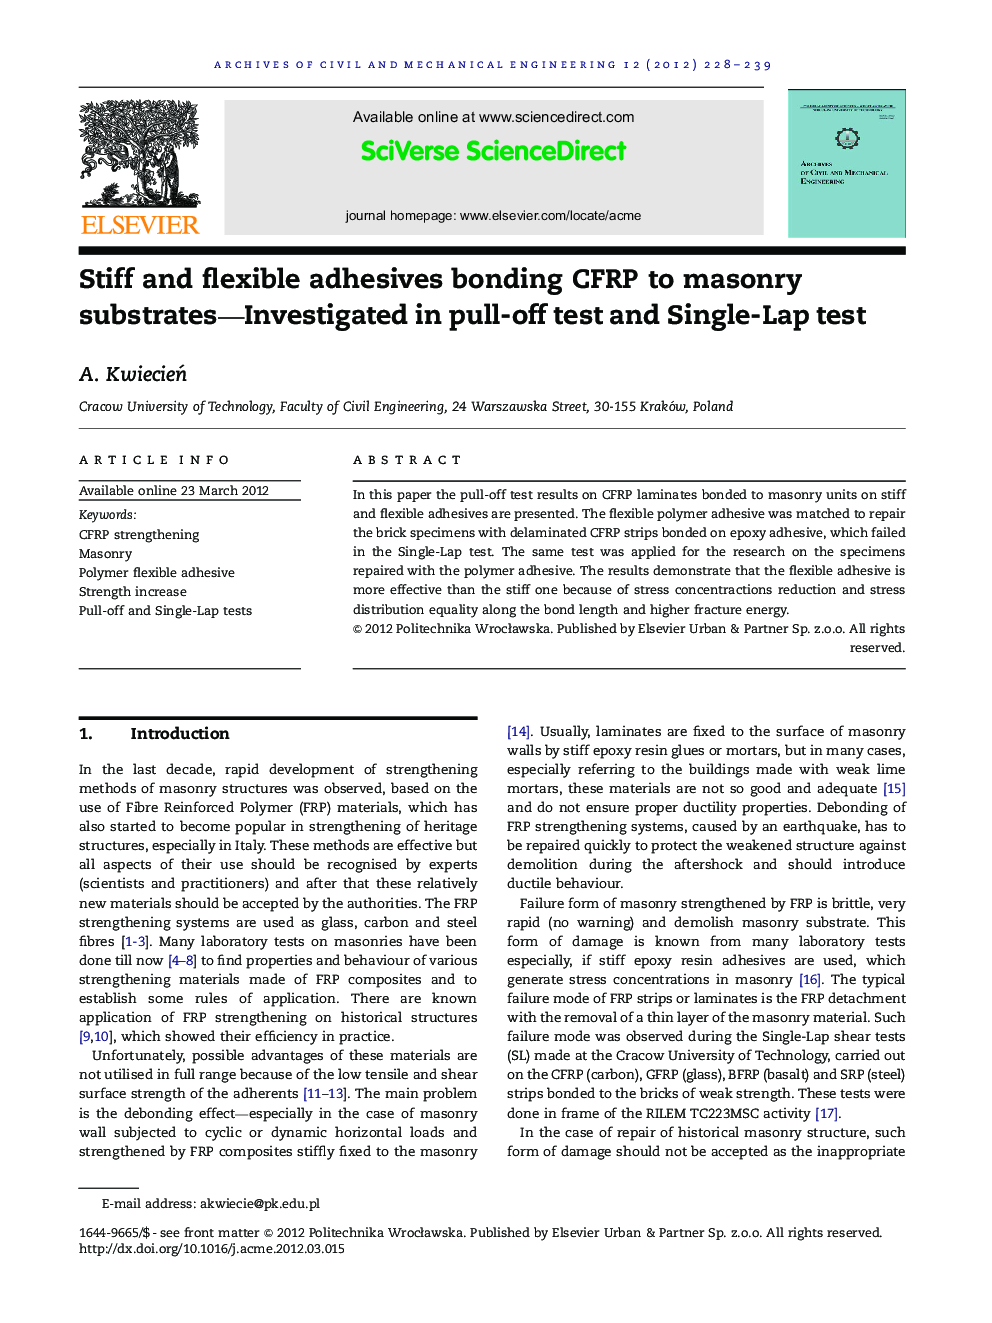 Stiff and flexible adhesives bonding CFRP to masonry substrates—Investigated in pull-off test and Single-Lap test